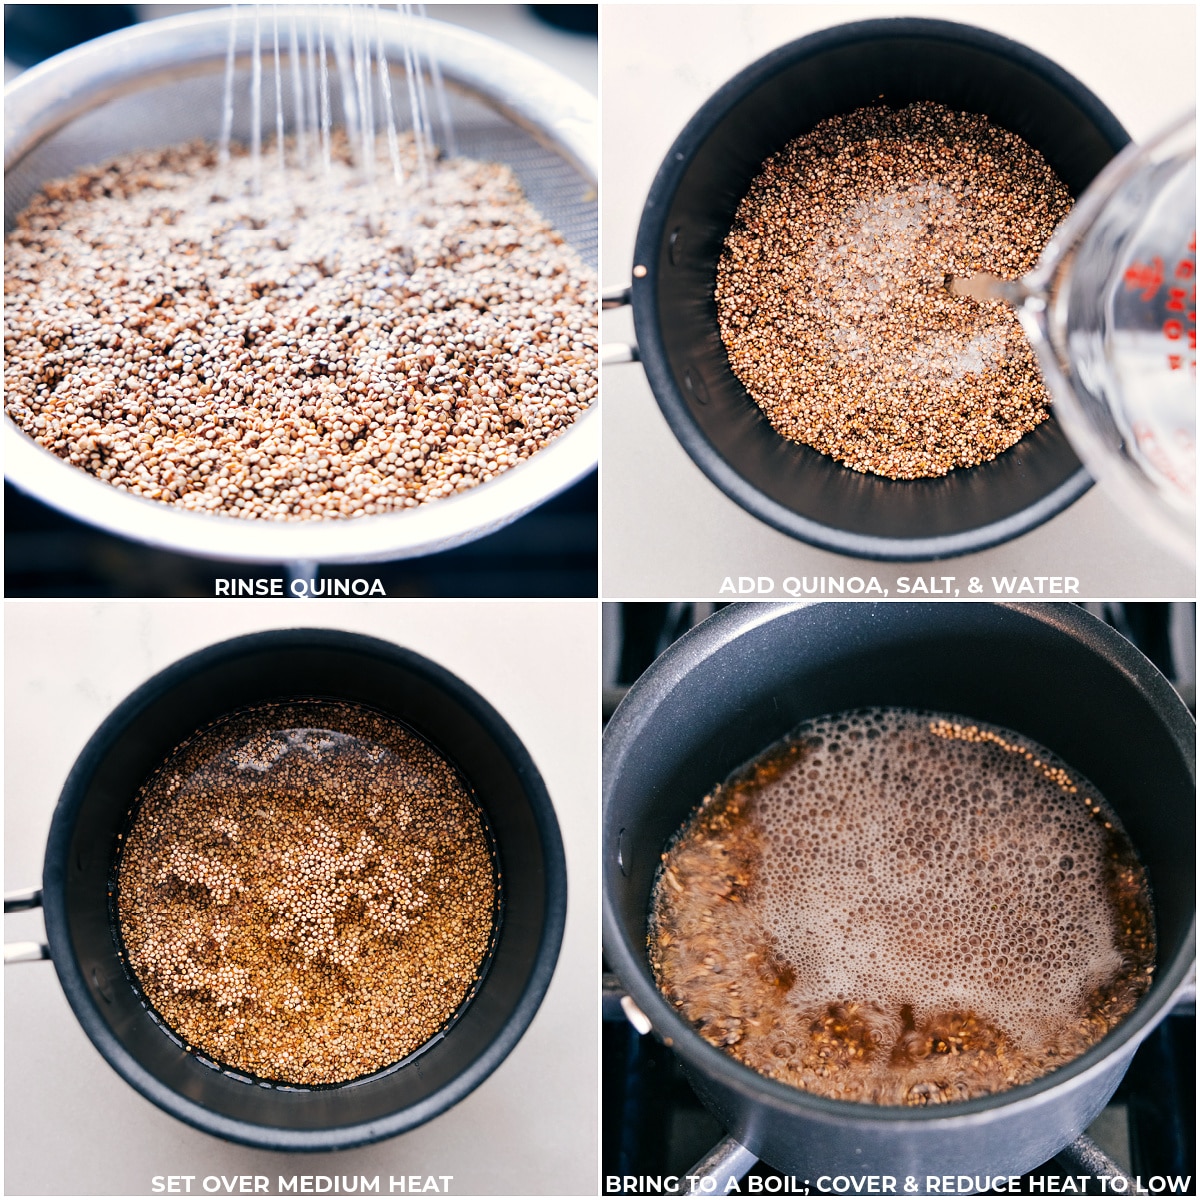 The grain being rinsed and cooked in water and salt.